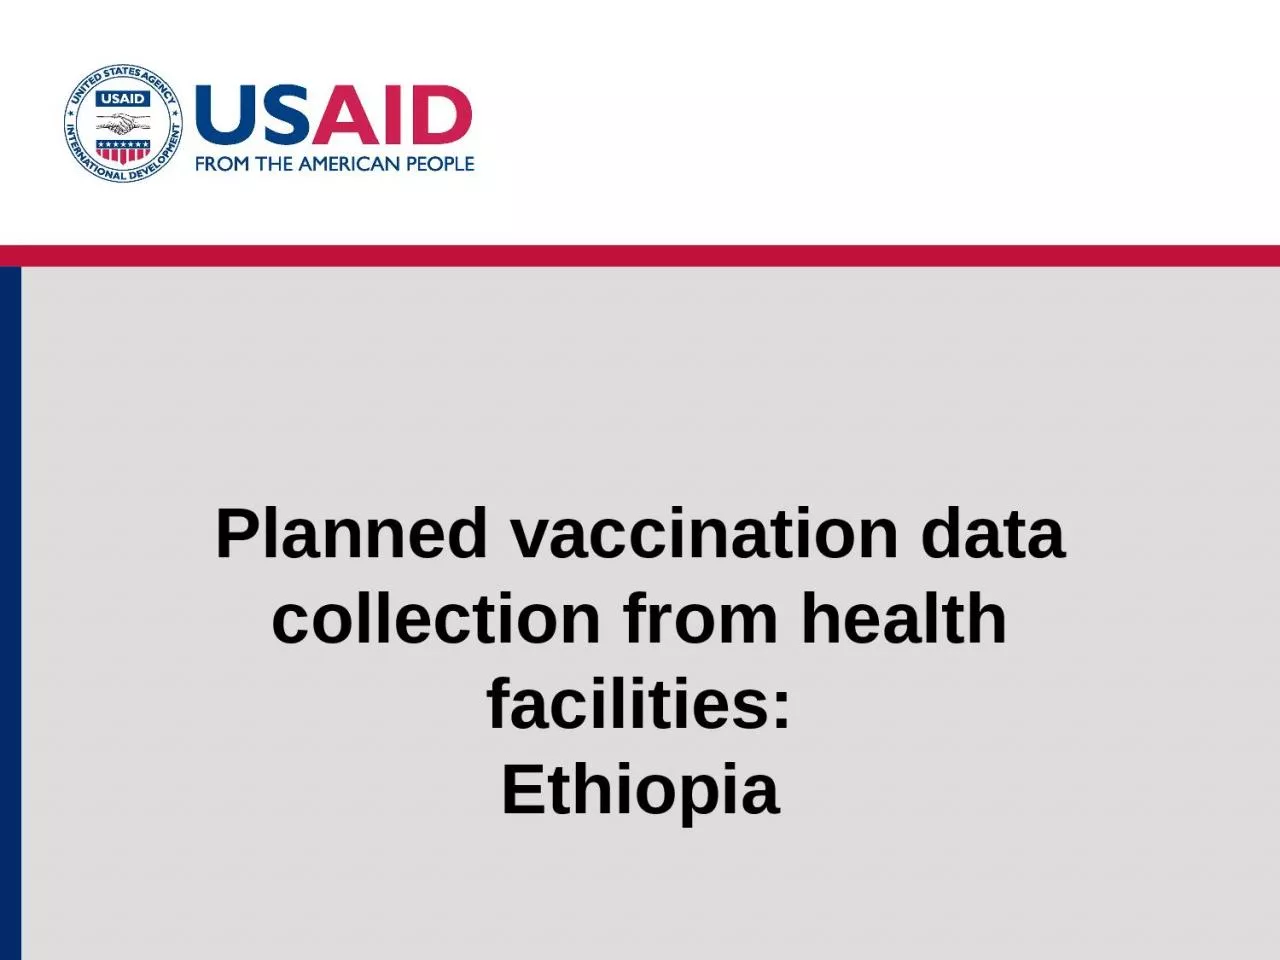 Planned vaccination data collection from health facilities: